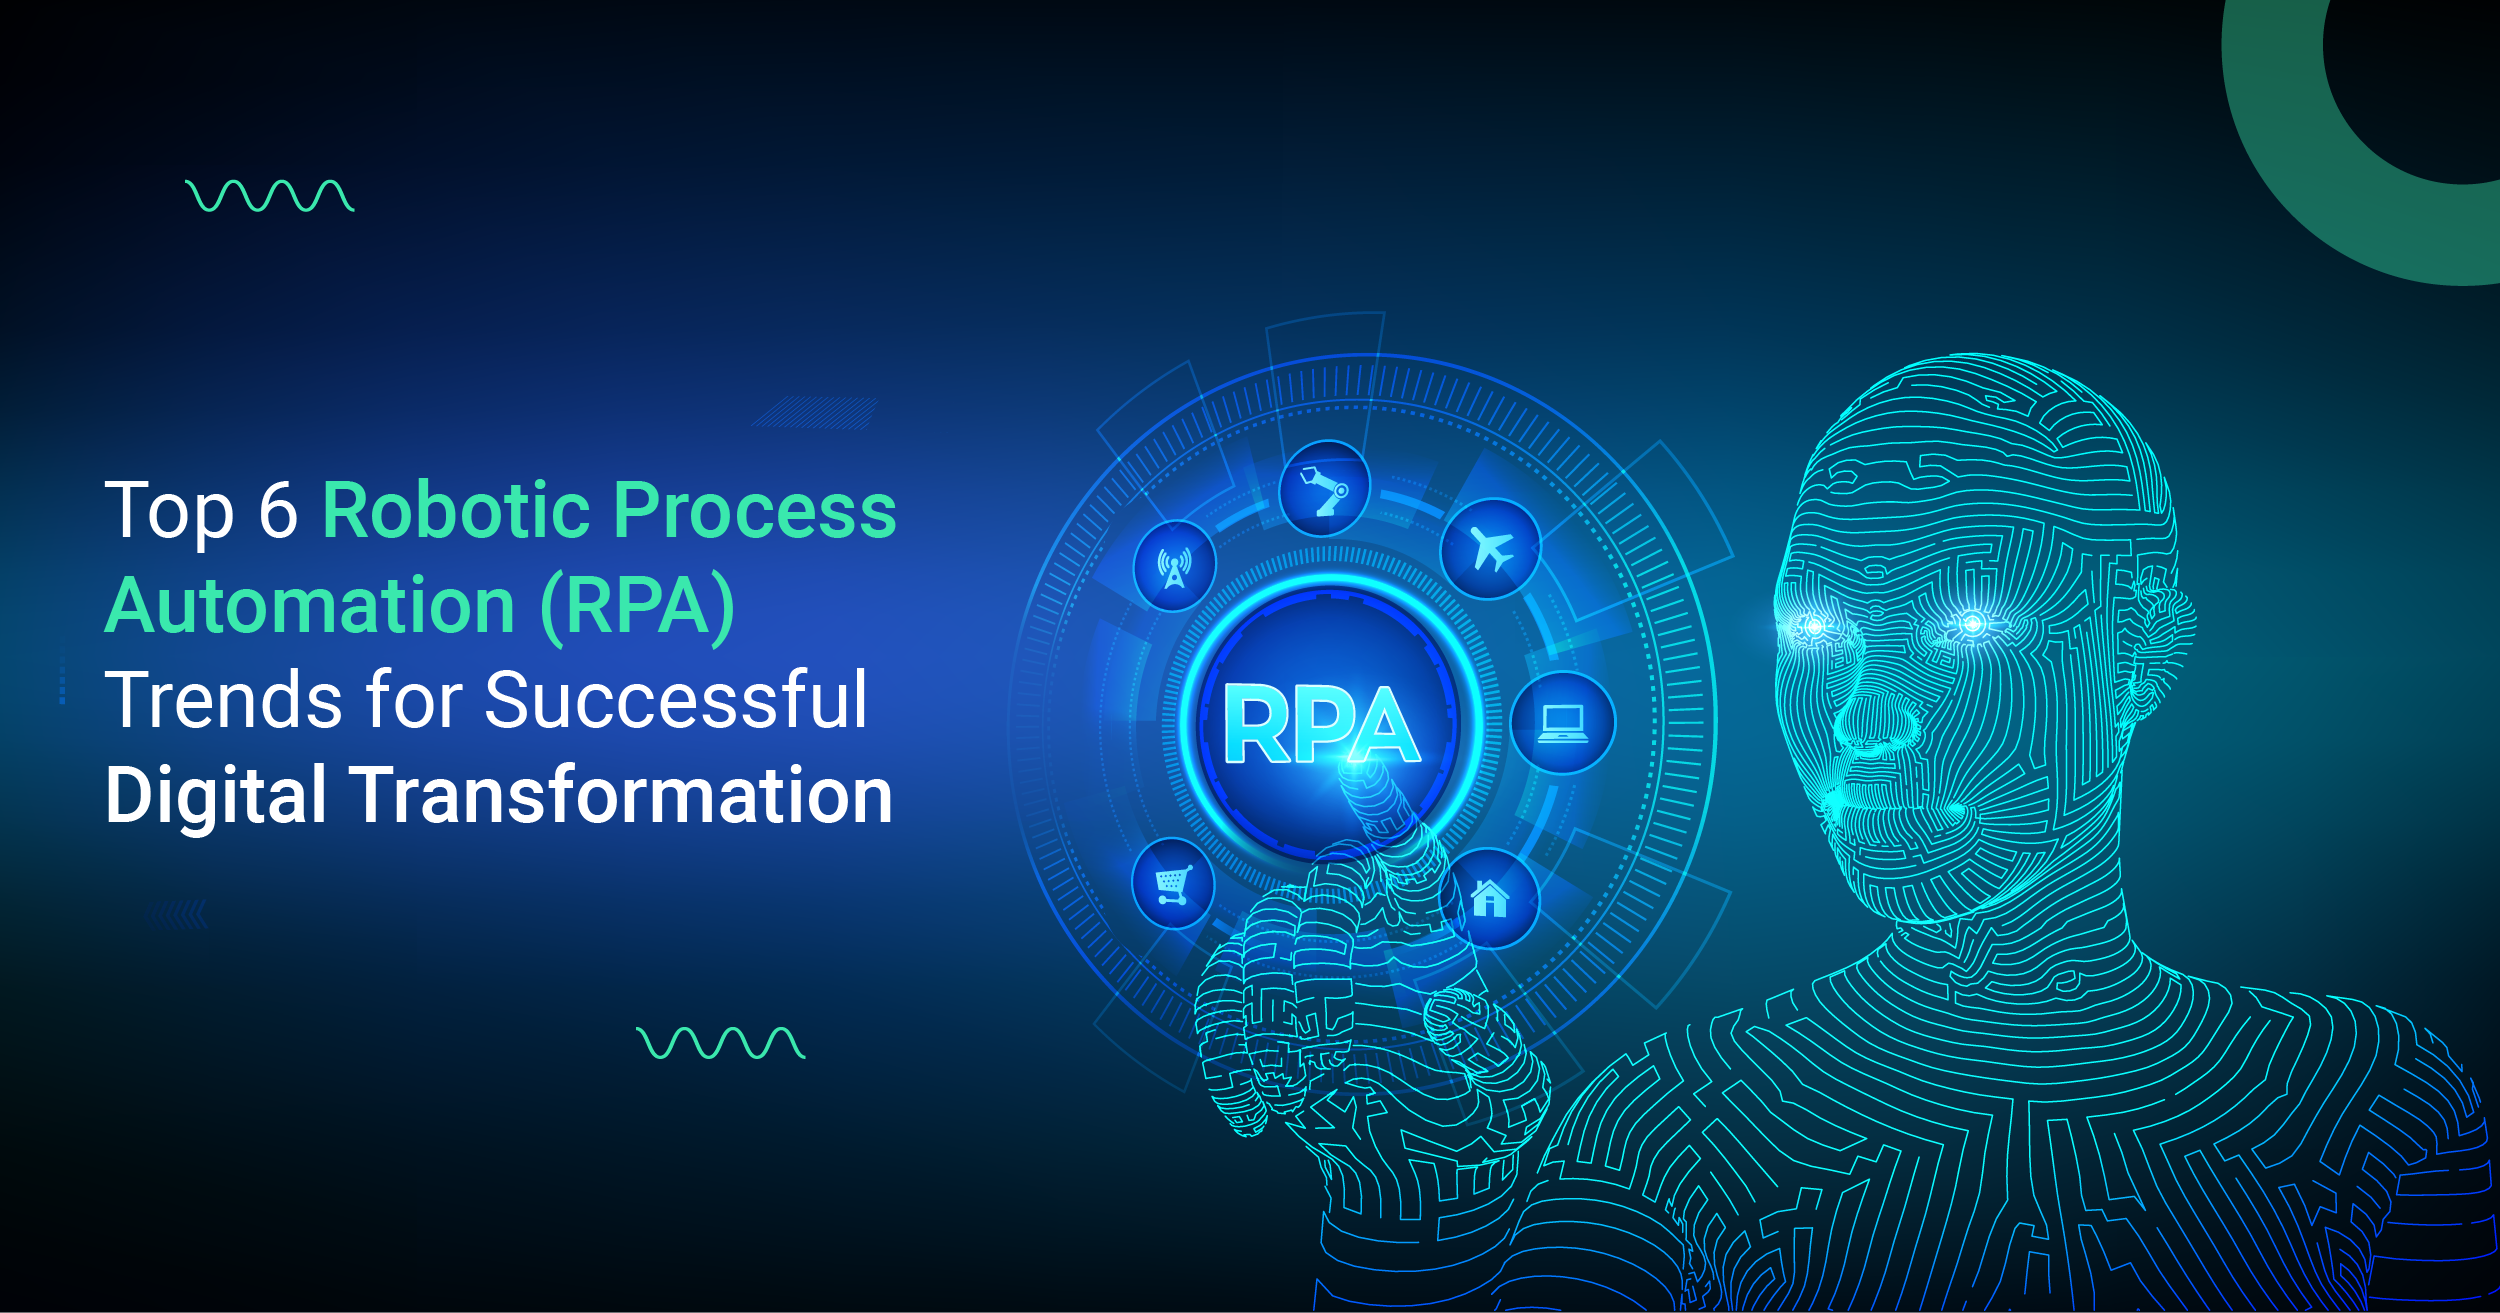 Top 6 Robotic Process Automation (RPA) Trends for Successful Digital Transformation (DX)